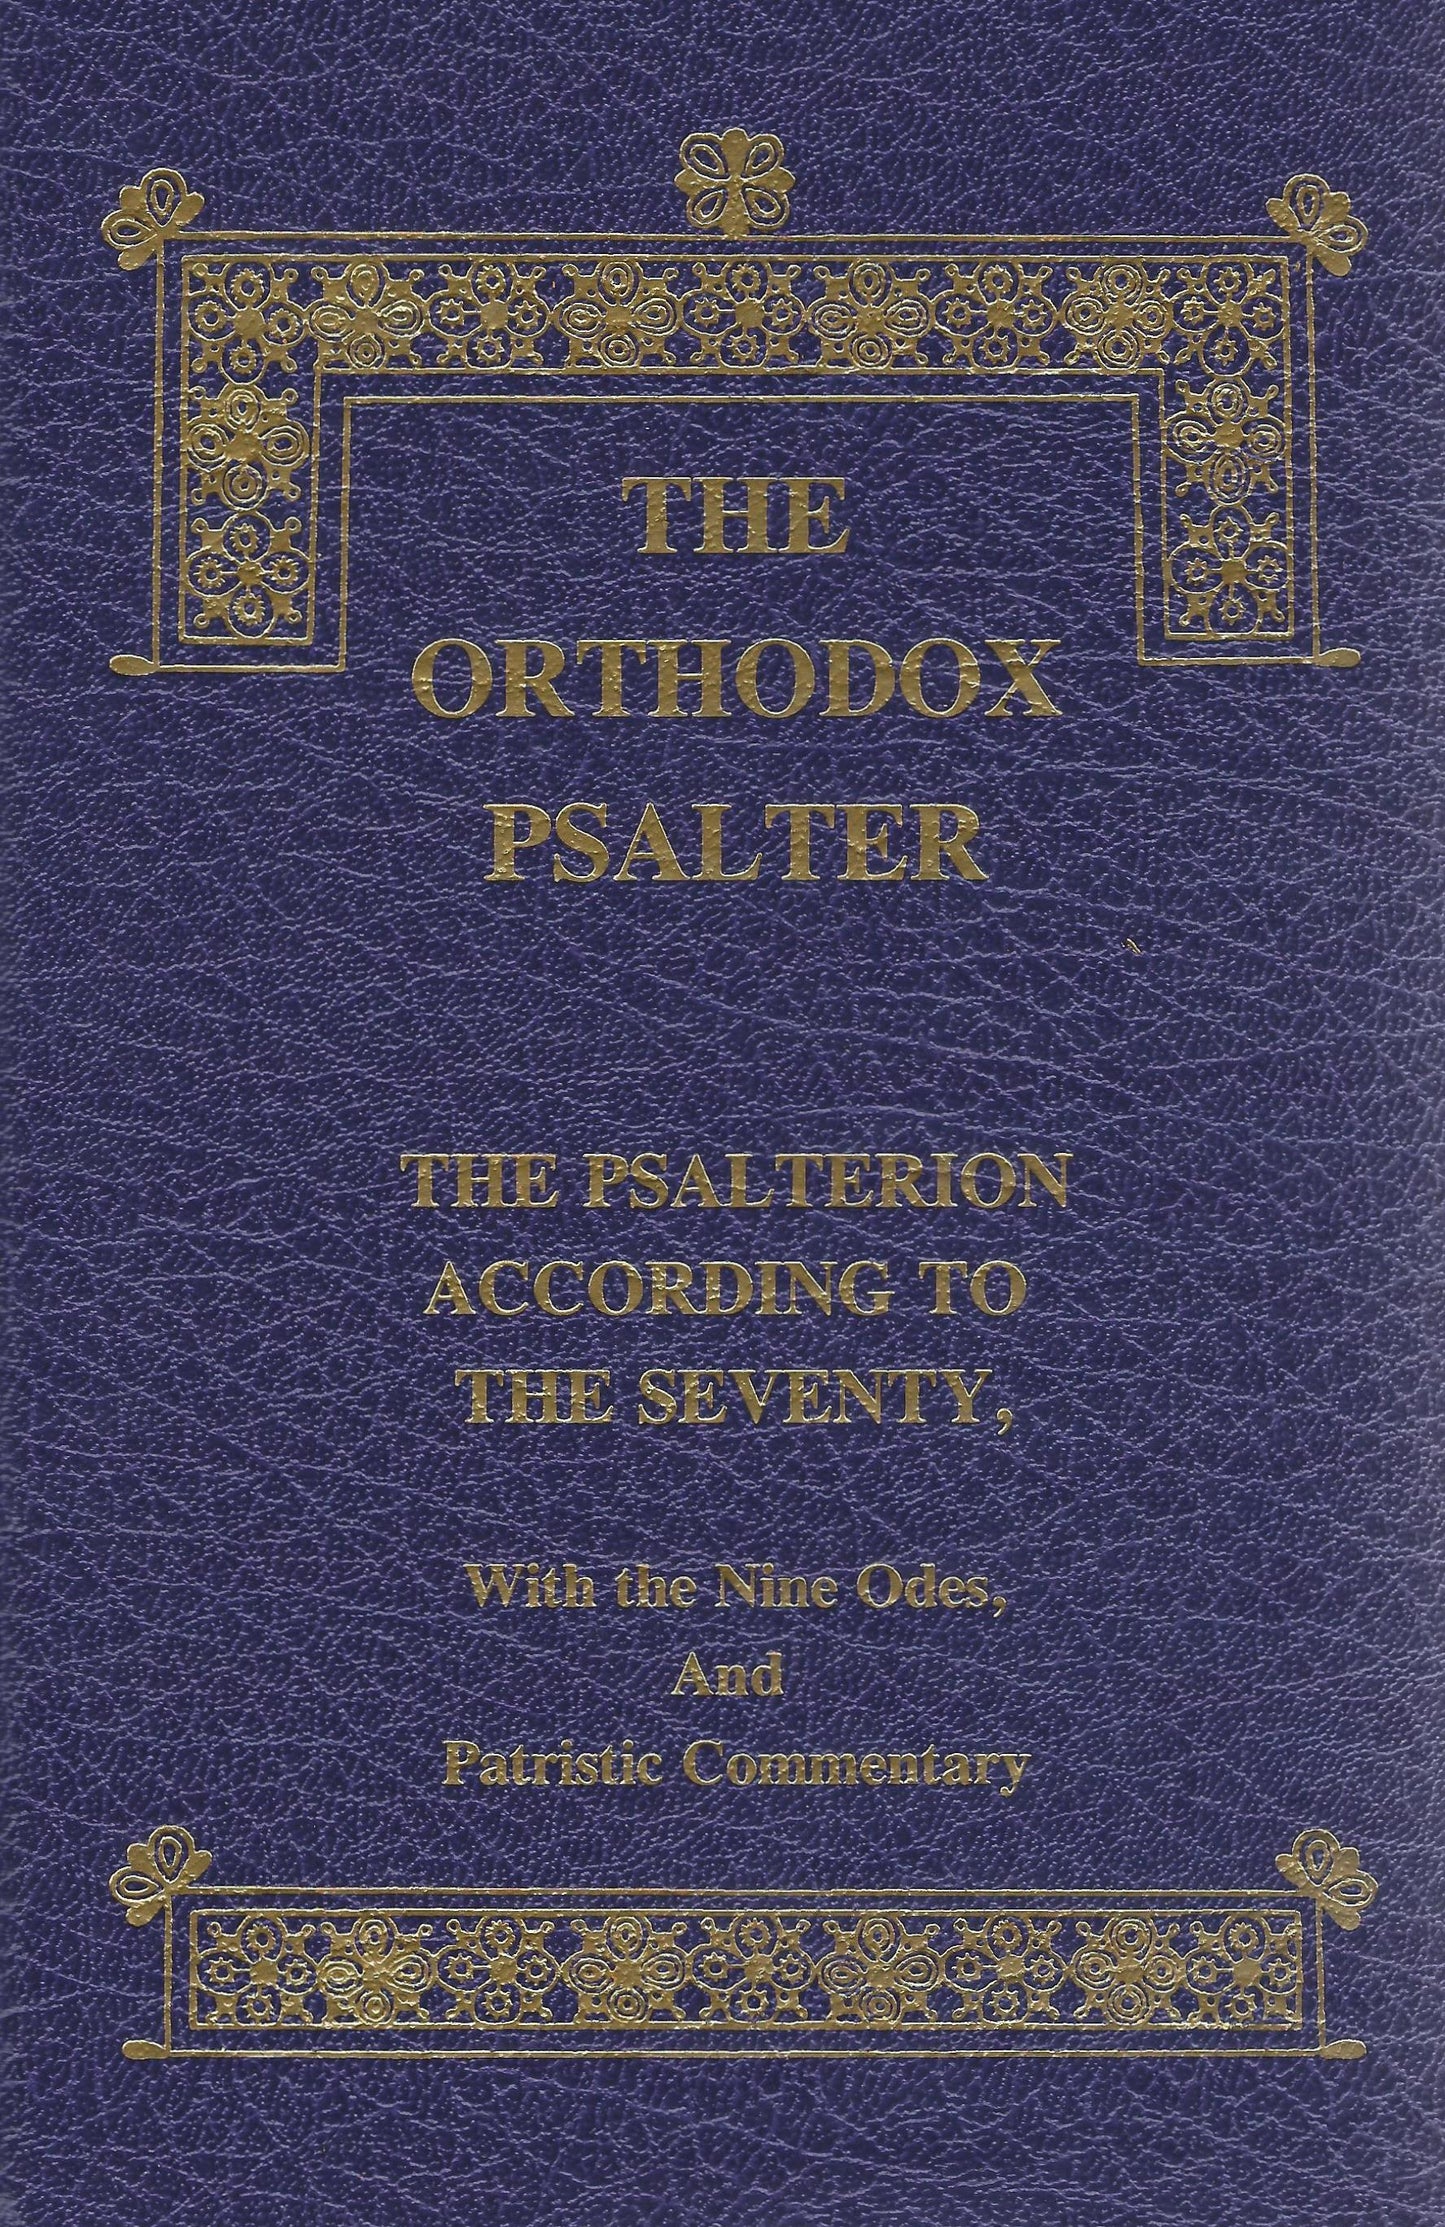 The Orthodox Psalter with Commentary